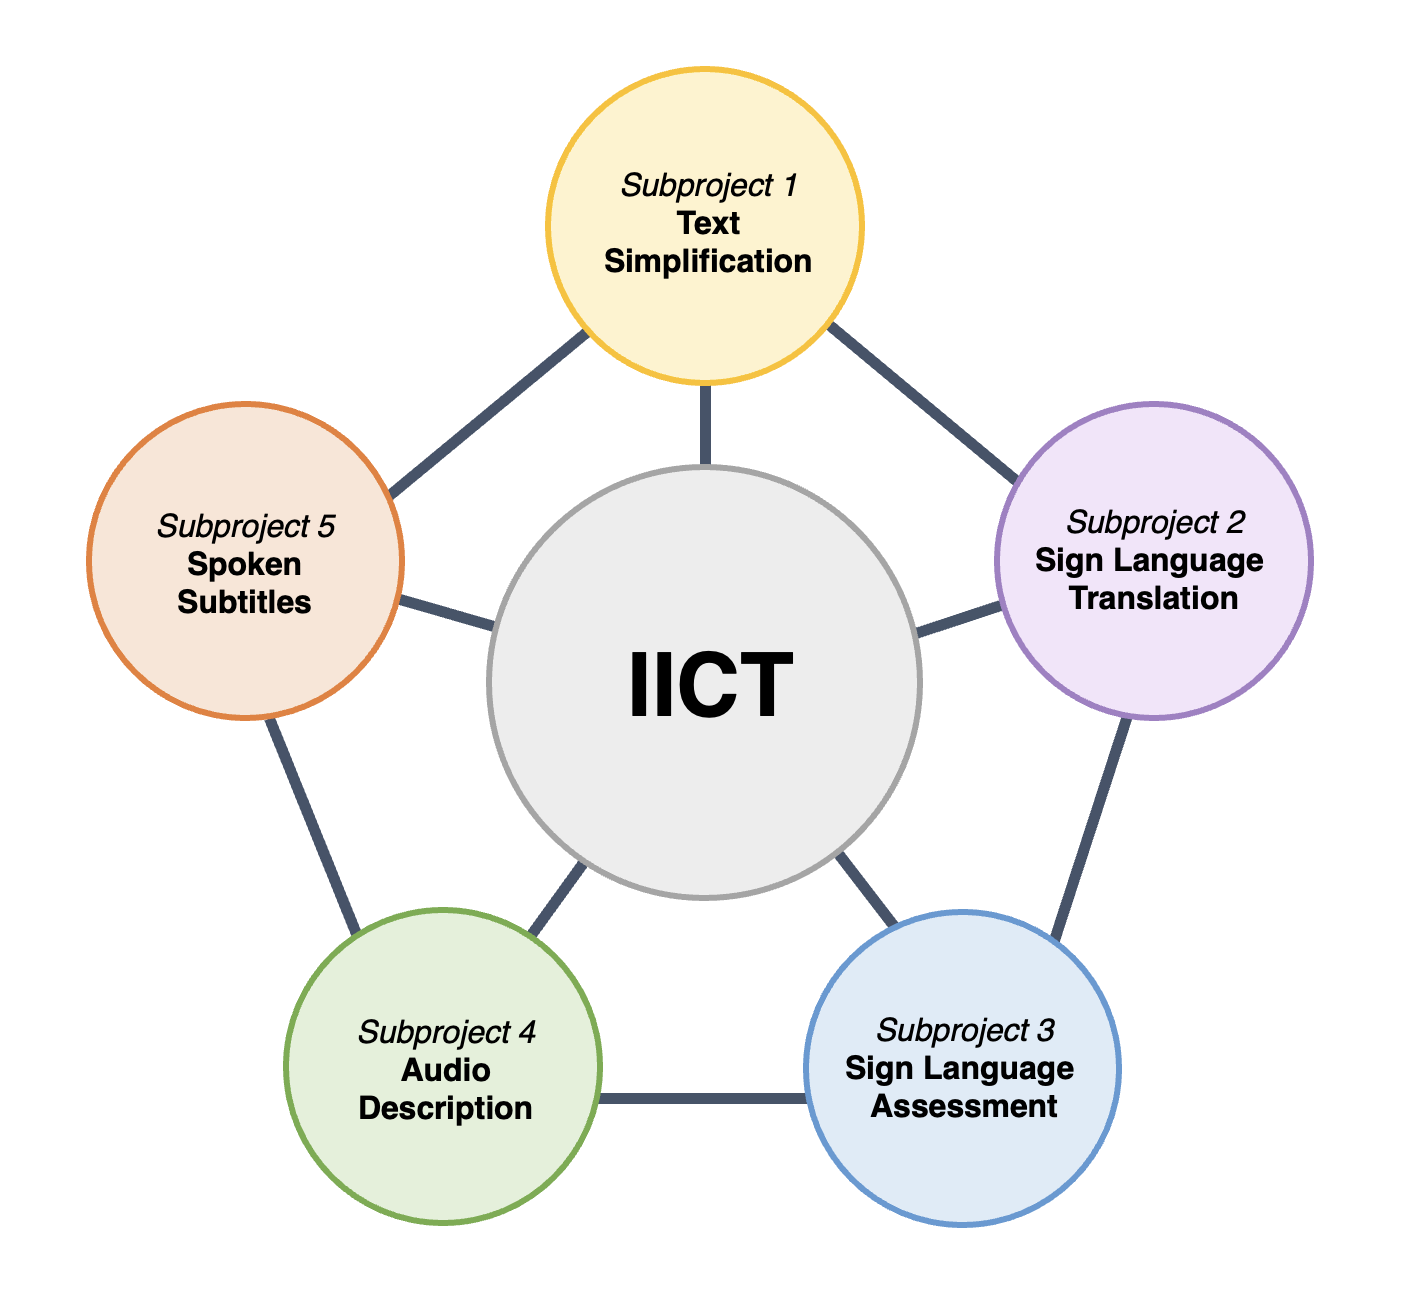 Diagram showing the five research areas of the IICT project: Text simplification, sign language translation, sign language assessment, audio description, and spoken subtitles.